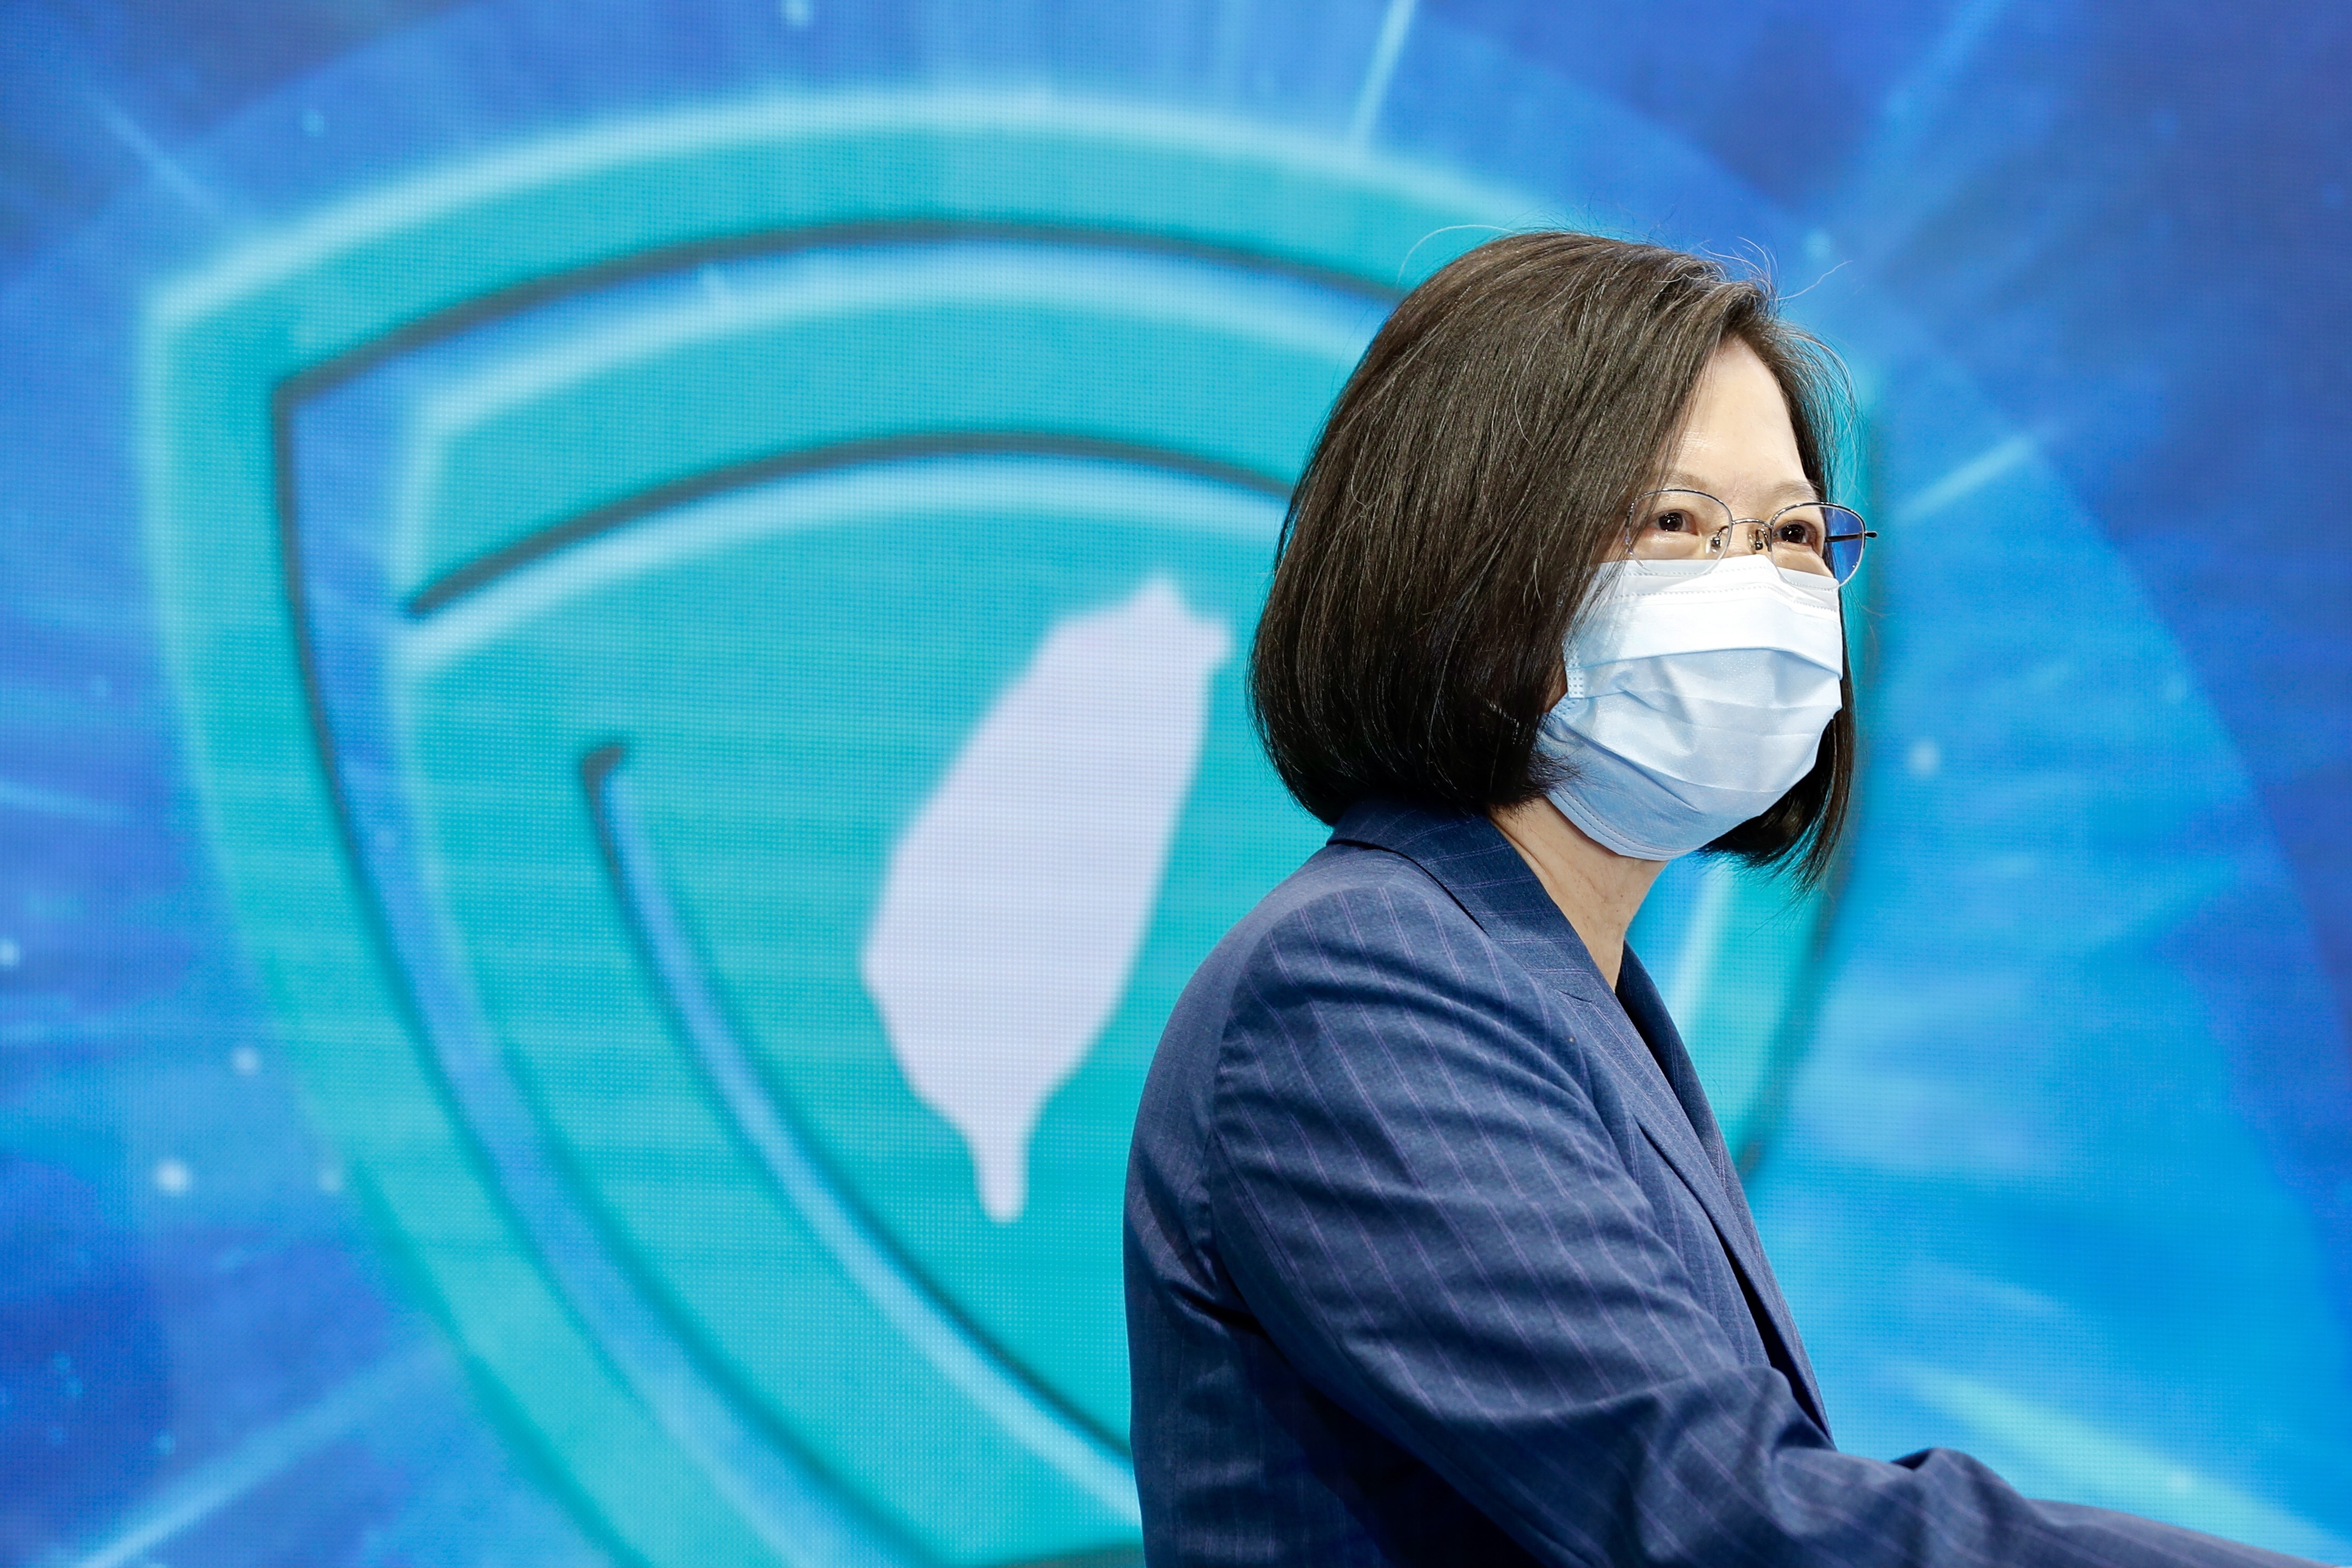 Taiwanese President Tsai Ing-wen told a security forum in Taipei that Taiwan will defend itself. Photo: EPA-EFE